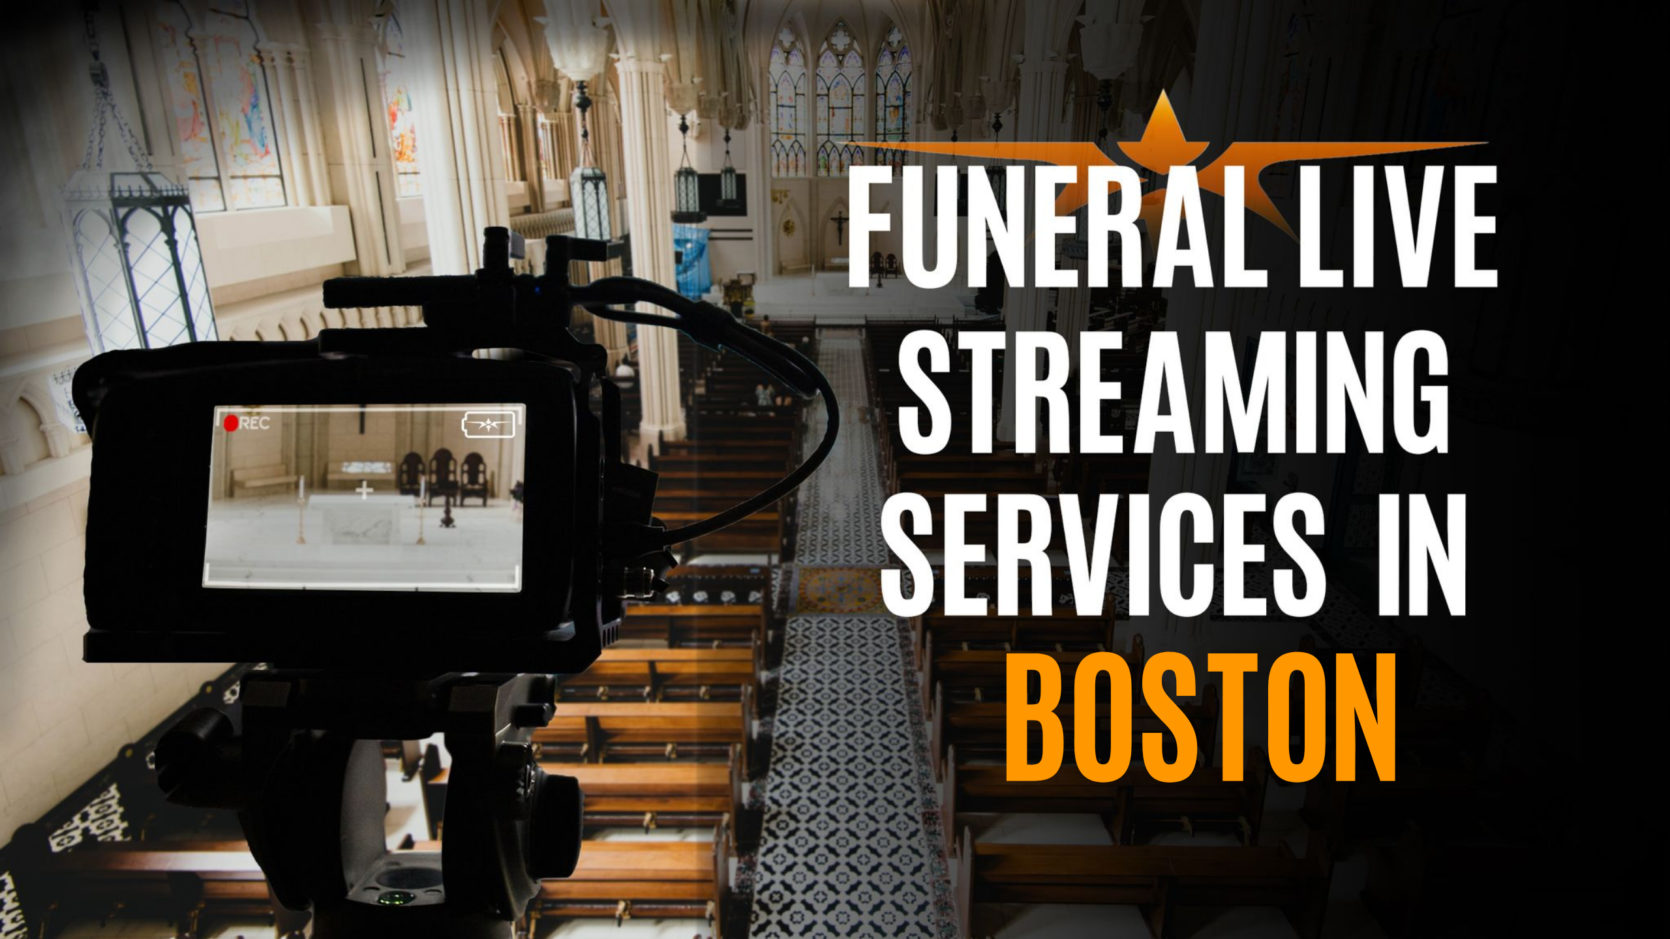 Funeral Live Streaming Services in Boston